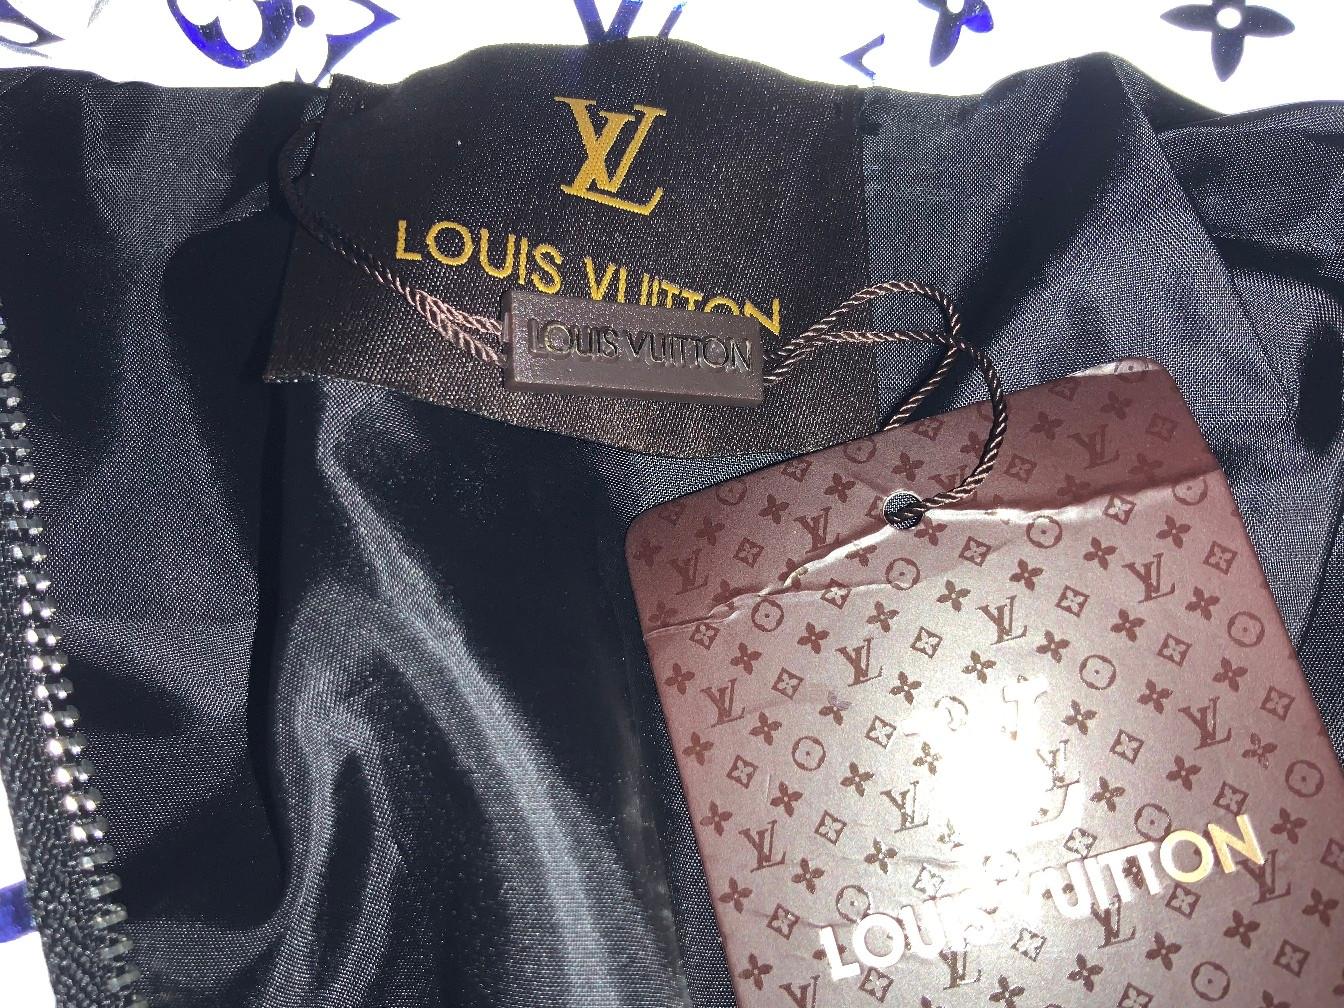 Louis Vuitton reflective jacket in B40 Solihull for £750.00 for sale